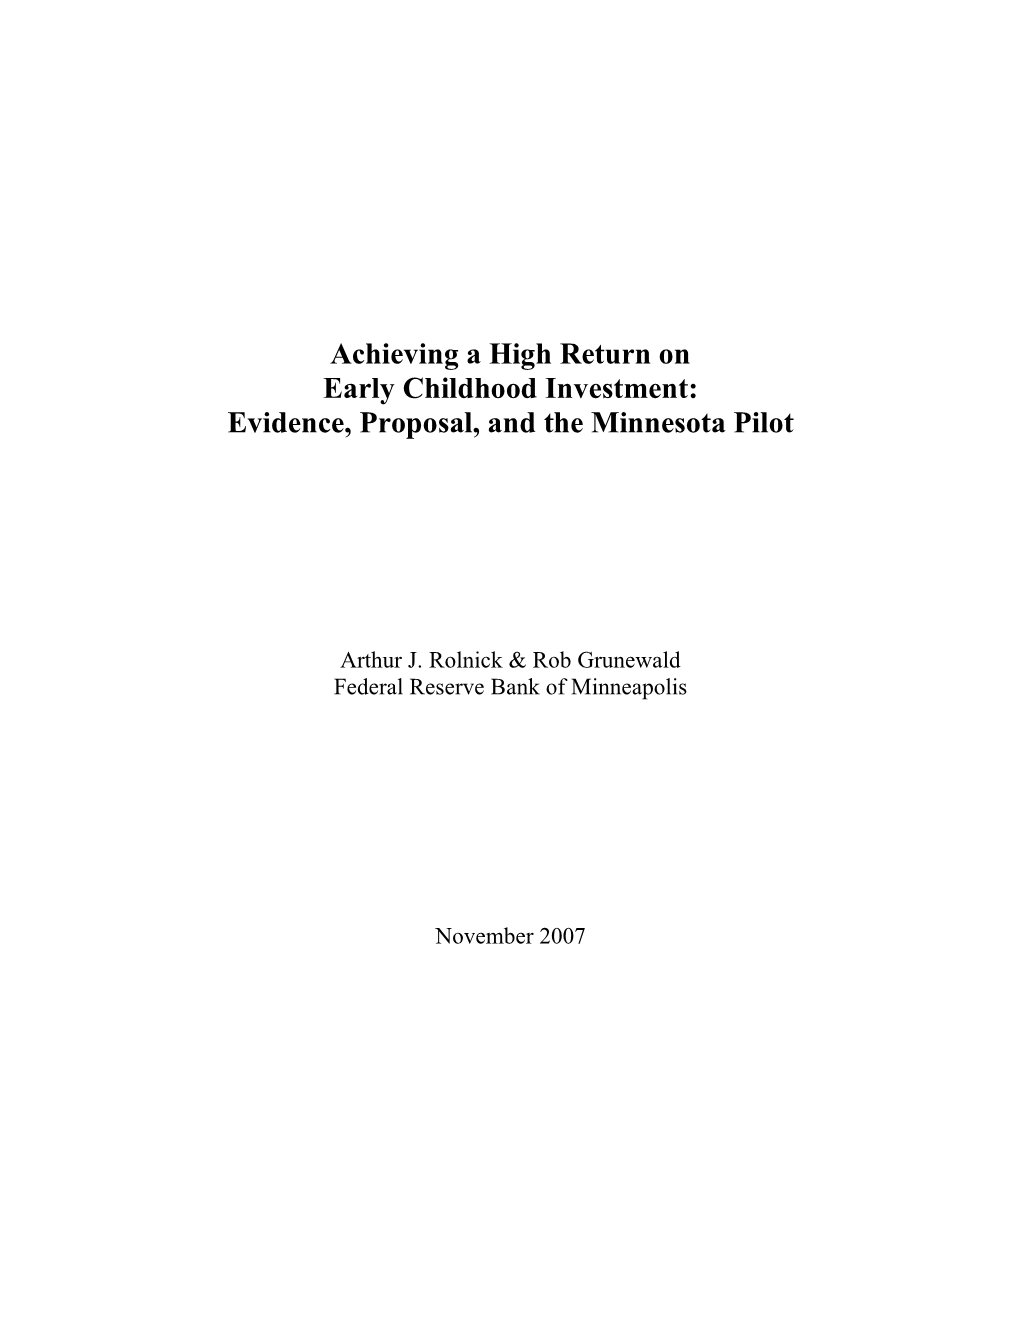 Achieving a High Return on Early Childhood Investment: Evidence, Proposal, and the Minnesota Pilot